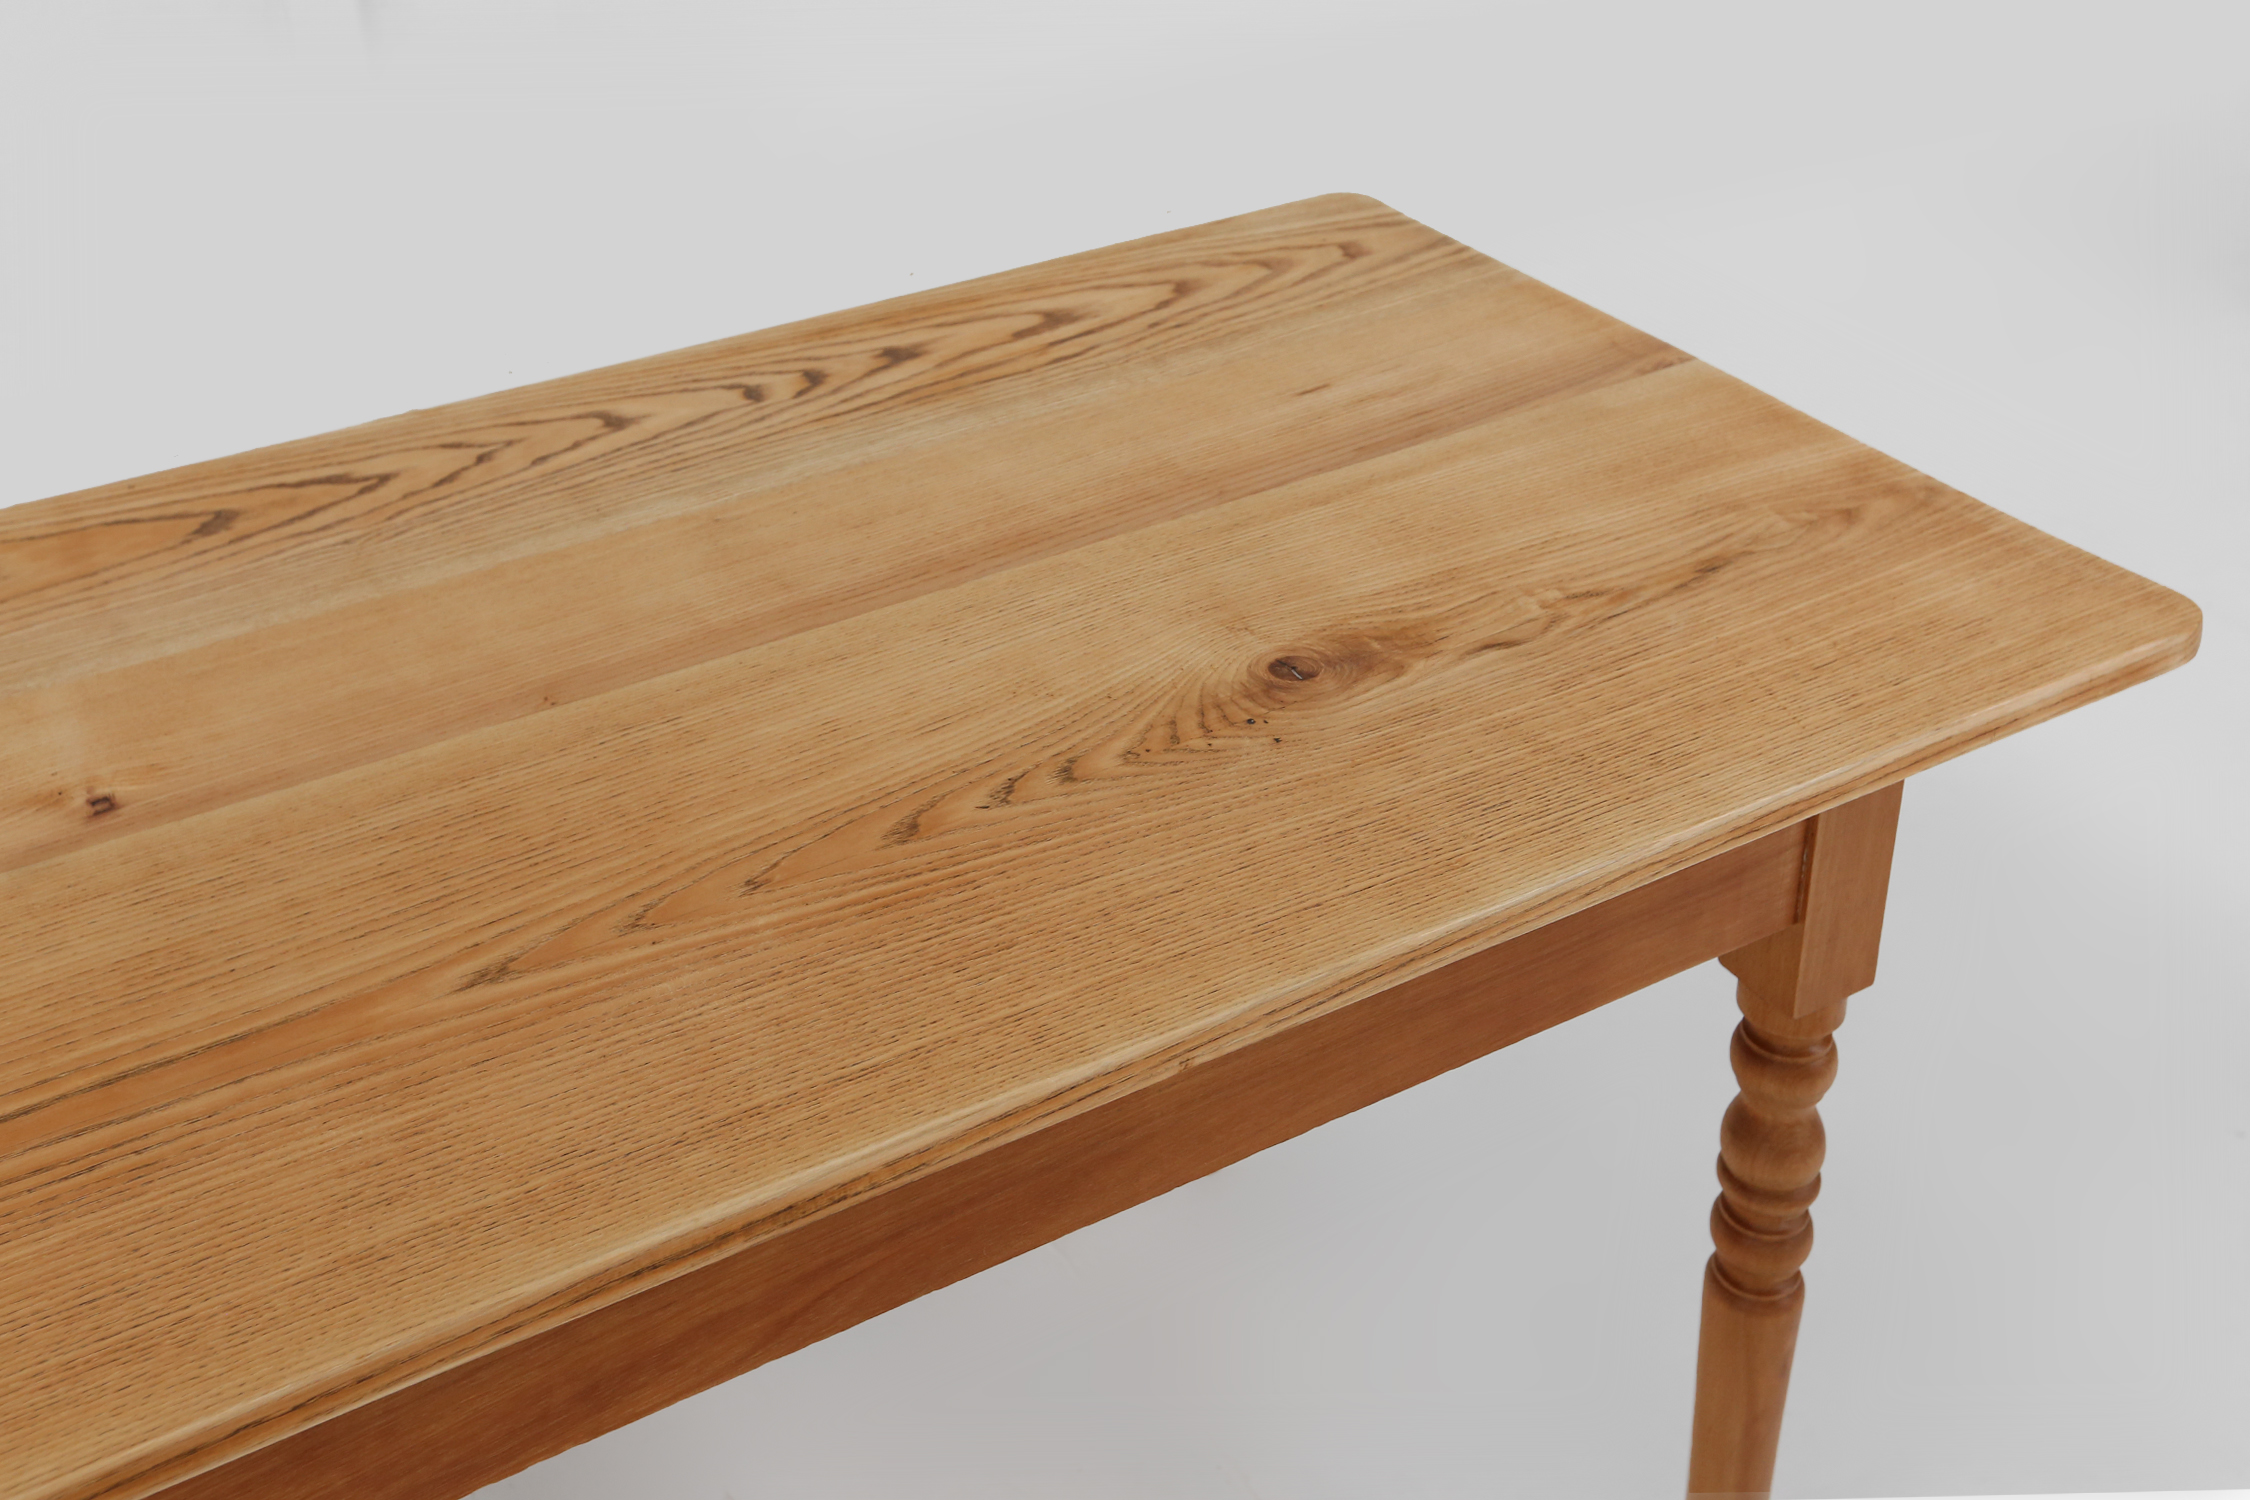 Rustic French farm table in wood with turned legs, ca. 1850thumbnail